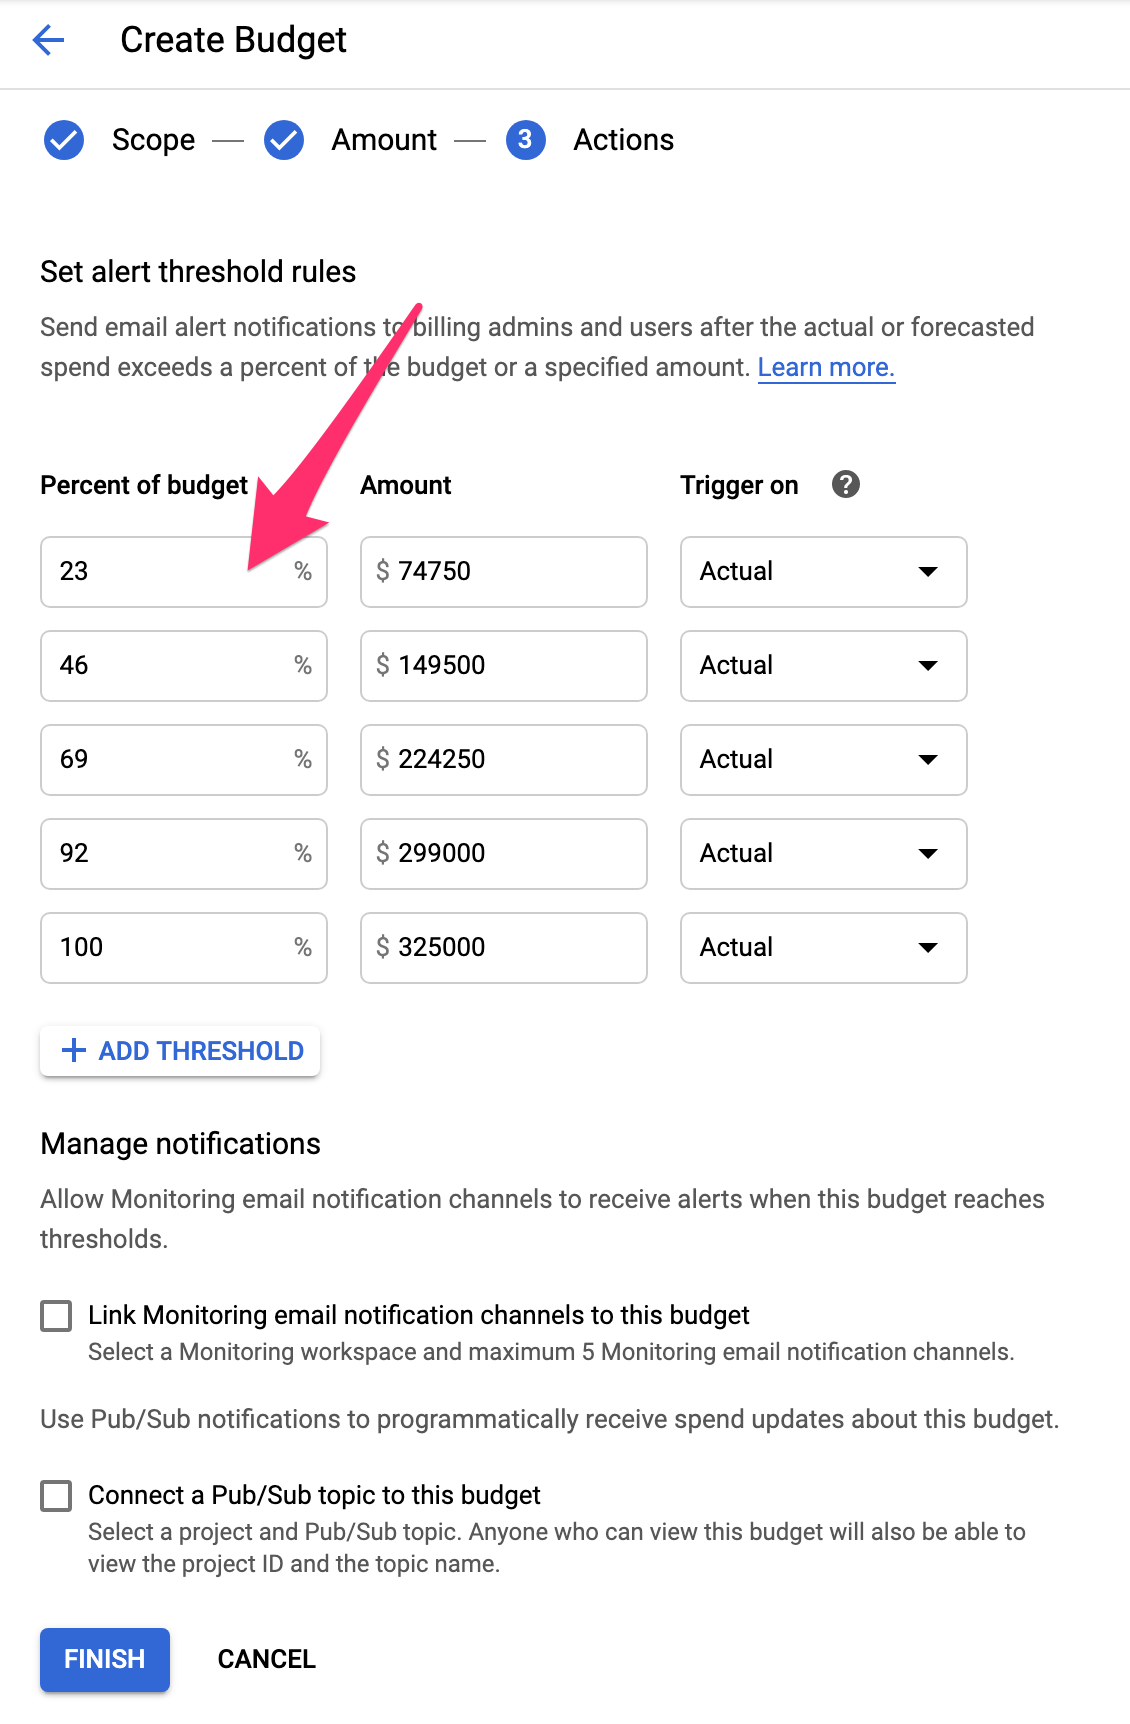 GCP Cloud Console Billing Console Budgets and Alerts - Create 3 - Actions